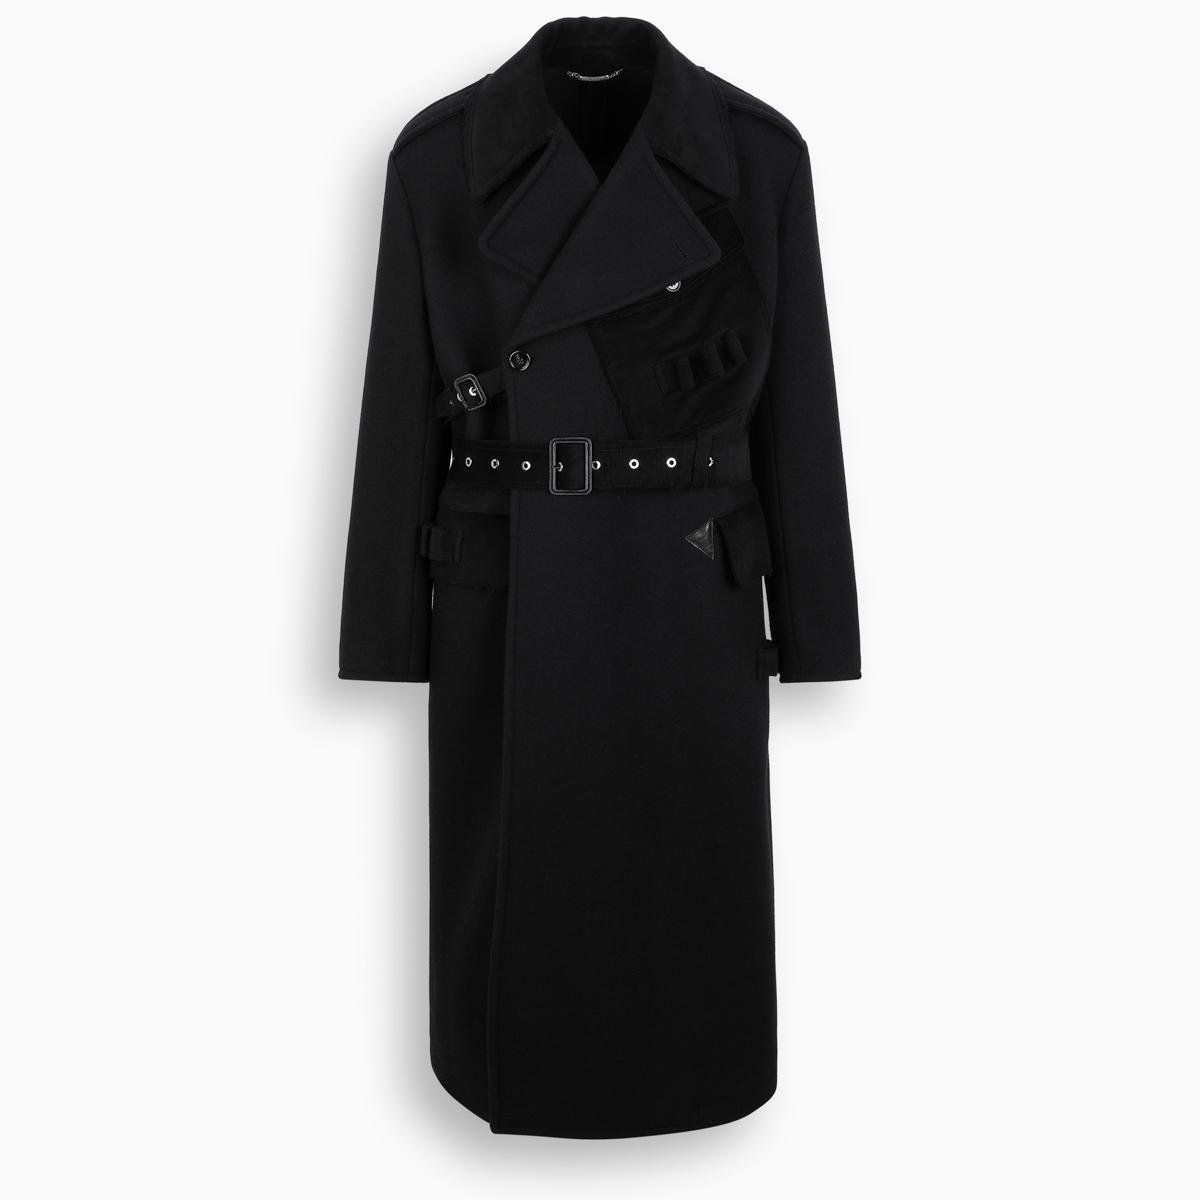 Dolce & Gabbana Belted Double-breasted Coat in Black for Men - Lyst